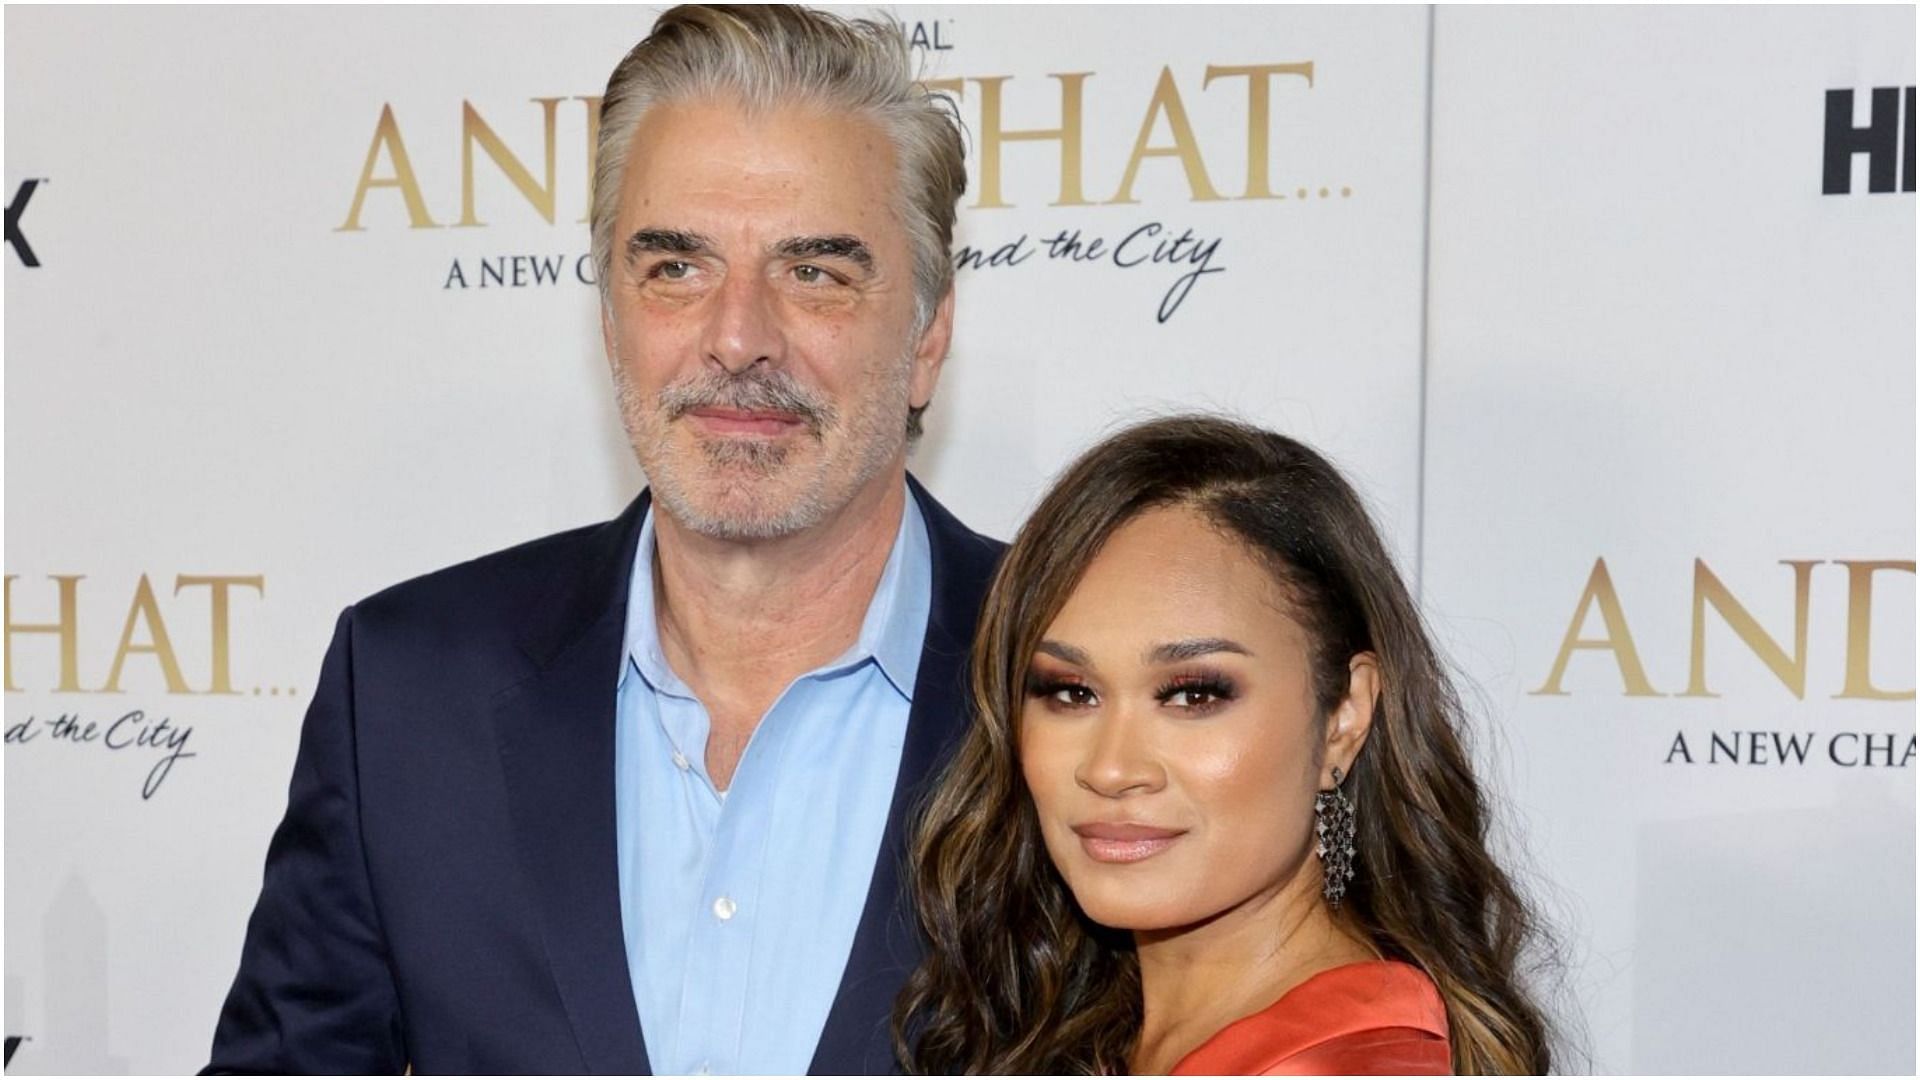 Chris Noth and Tara Wilson will separately celebrate Christmas following the sexual assault allegations against Noth (Image by Jamie McCarthy via Getty Images)